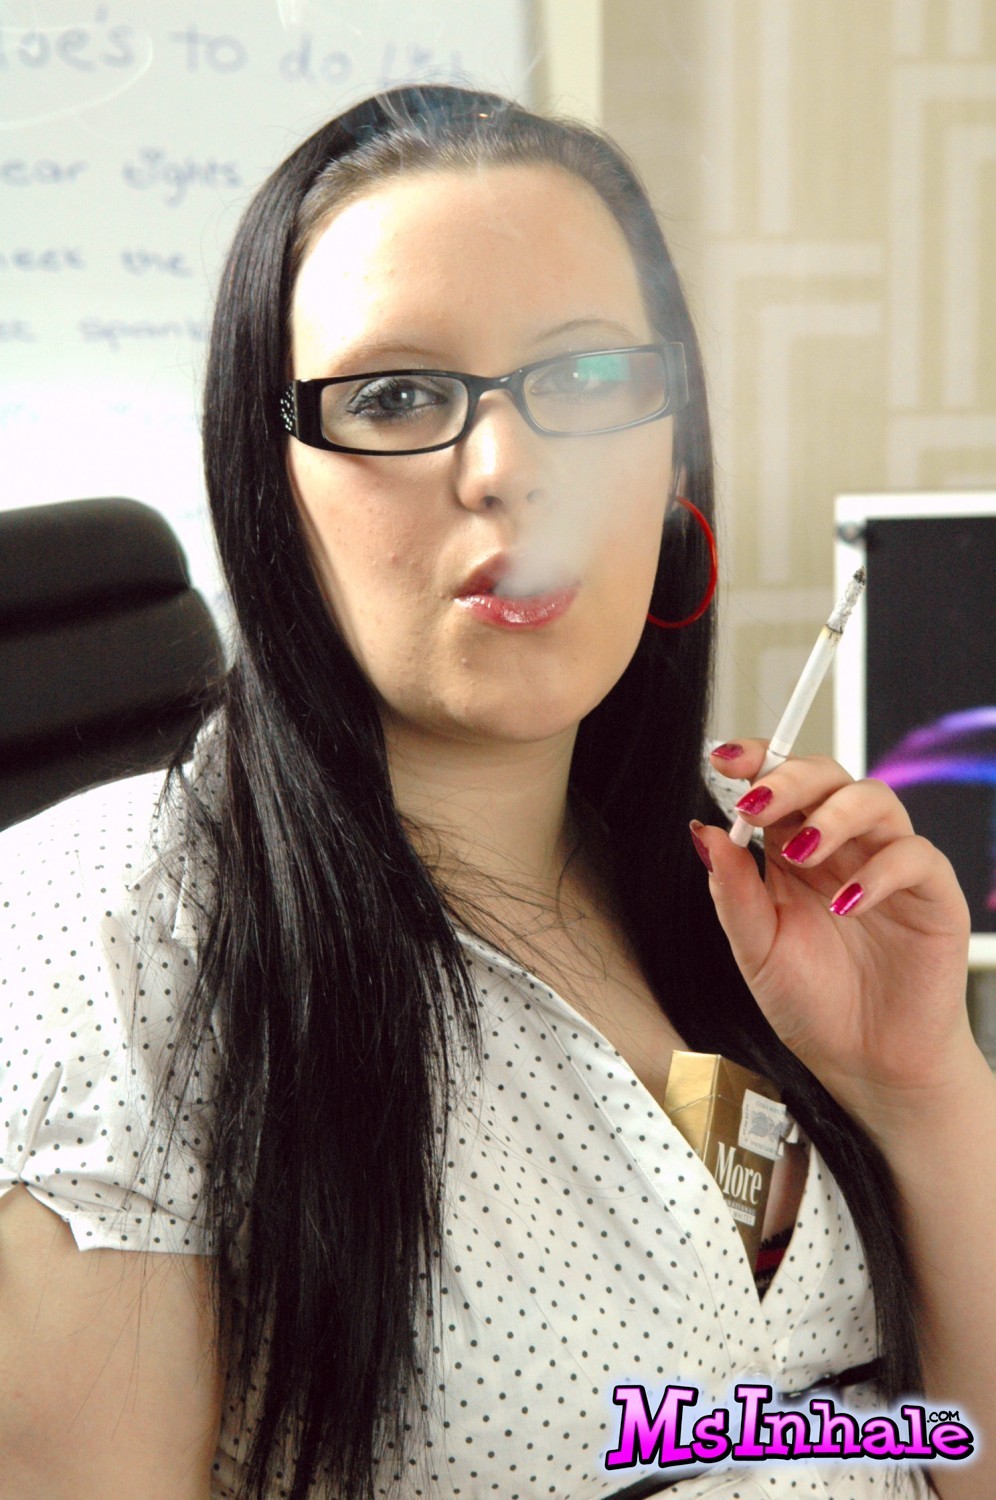 Teen secretary in glasses smoking a More 120 cigarette at work #70269206